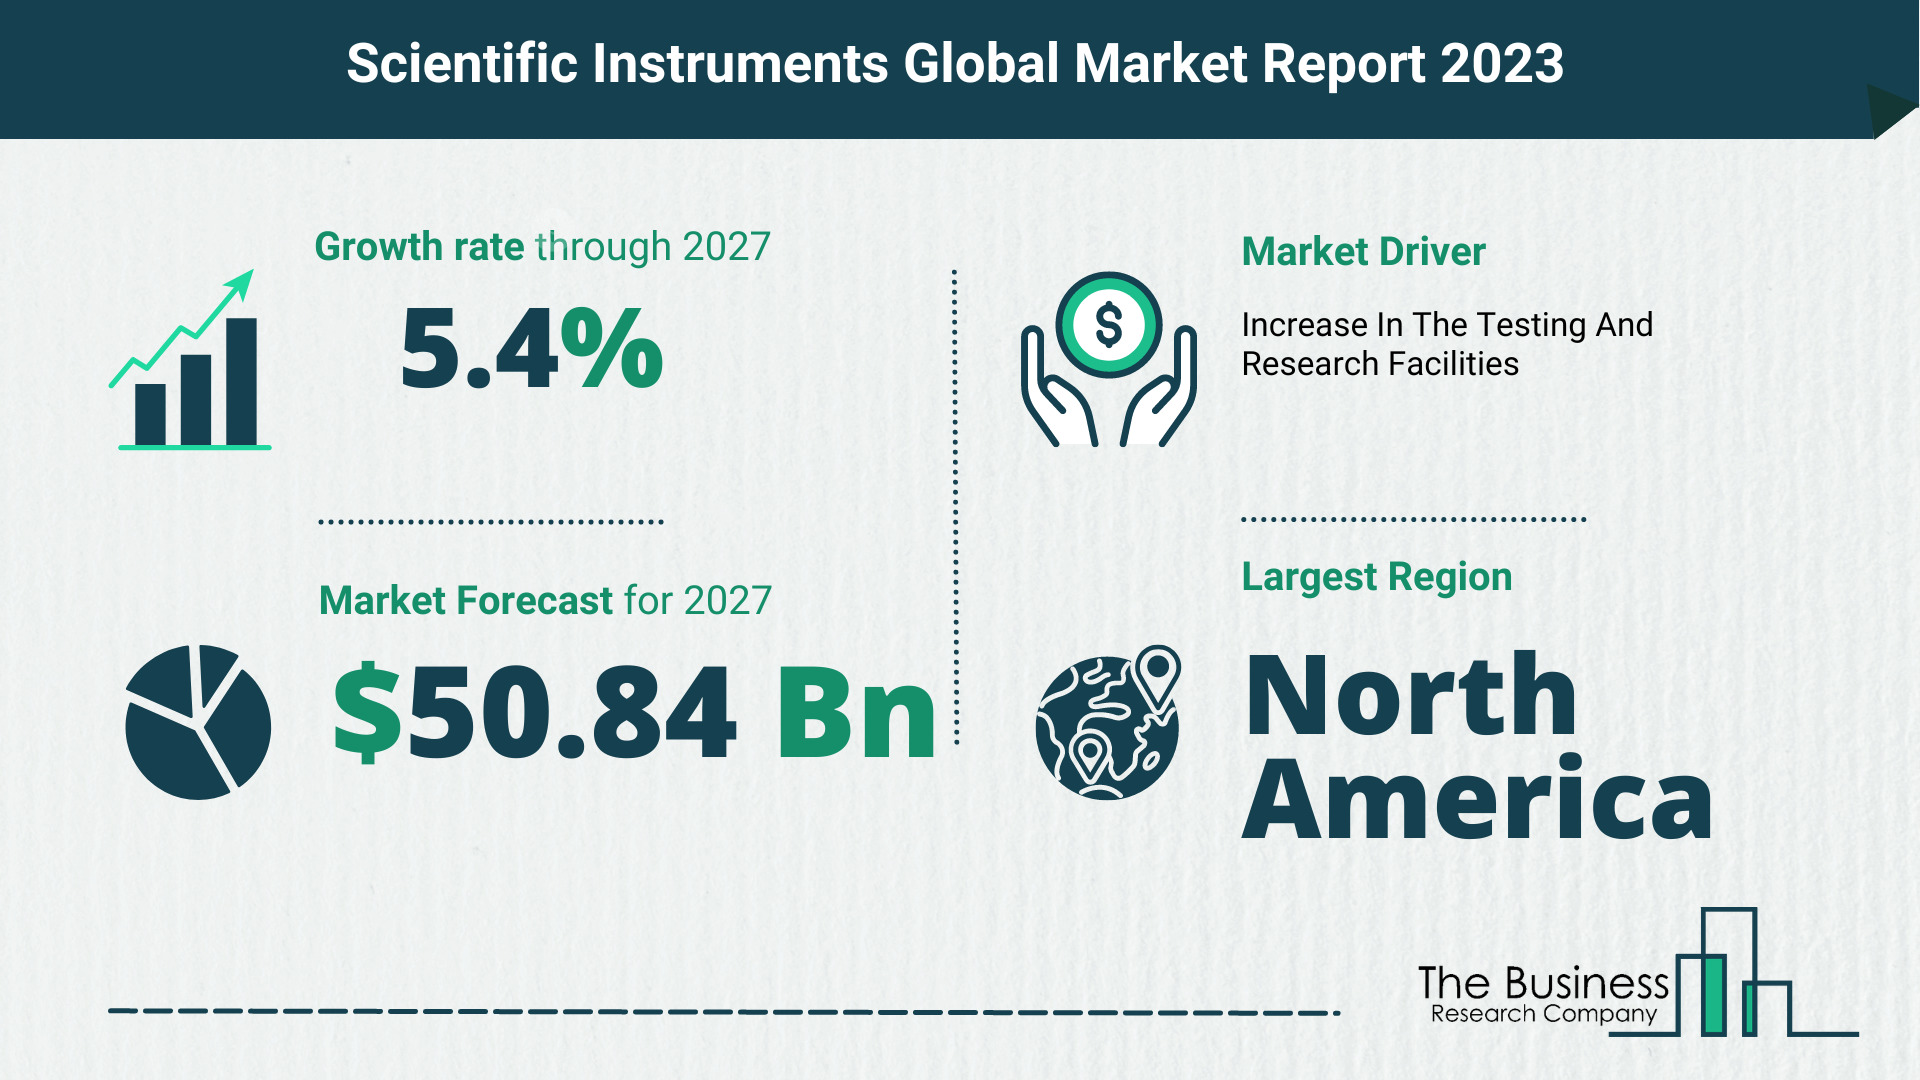 What Will The Scientific Instruments Market Look Like In 2023?